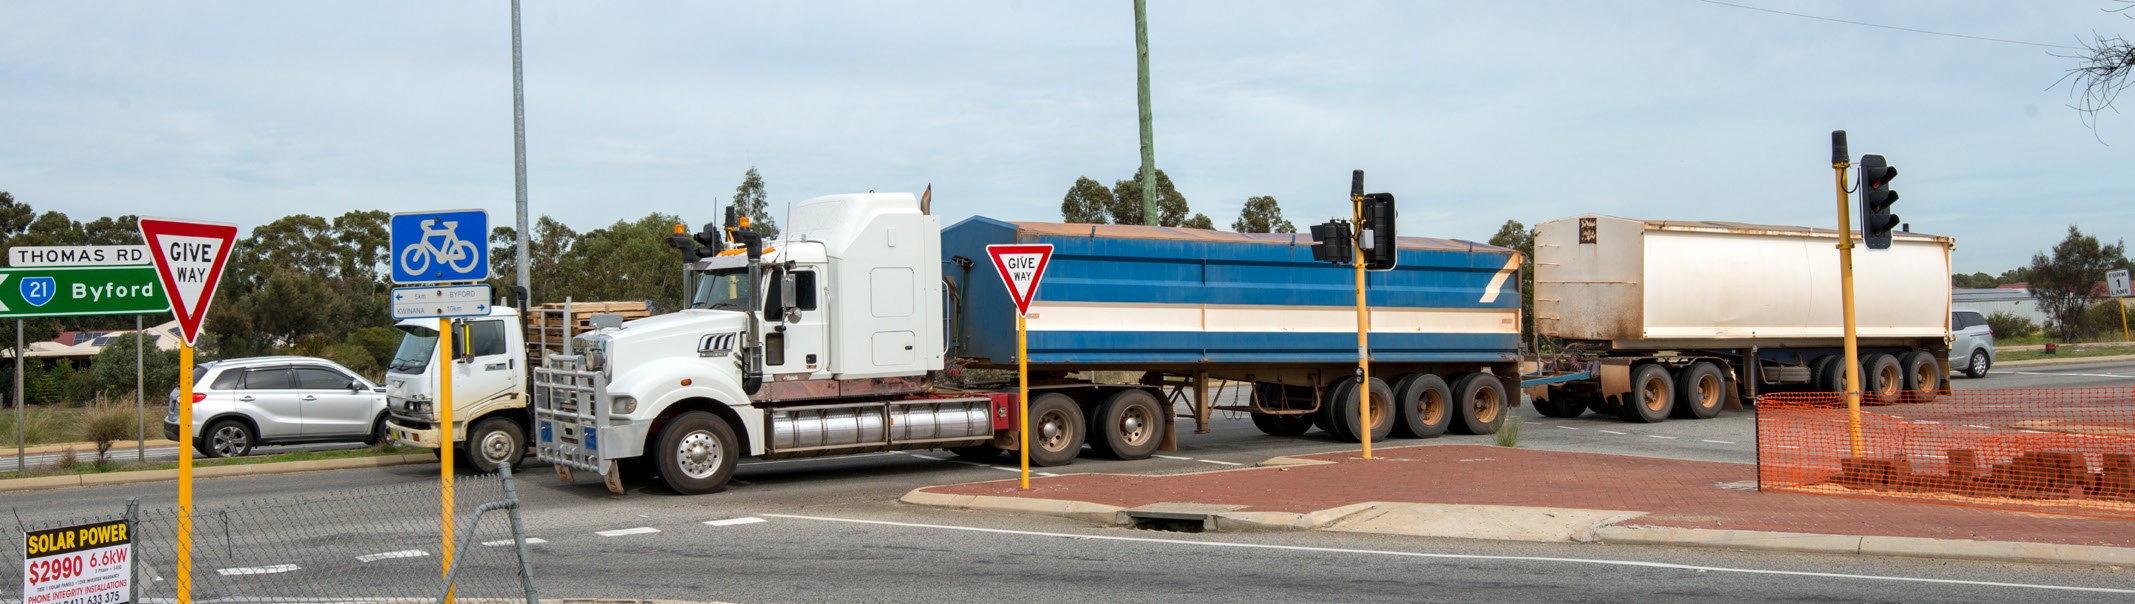 Truck travelling on Thomas Road